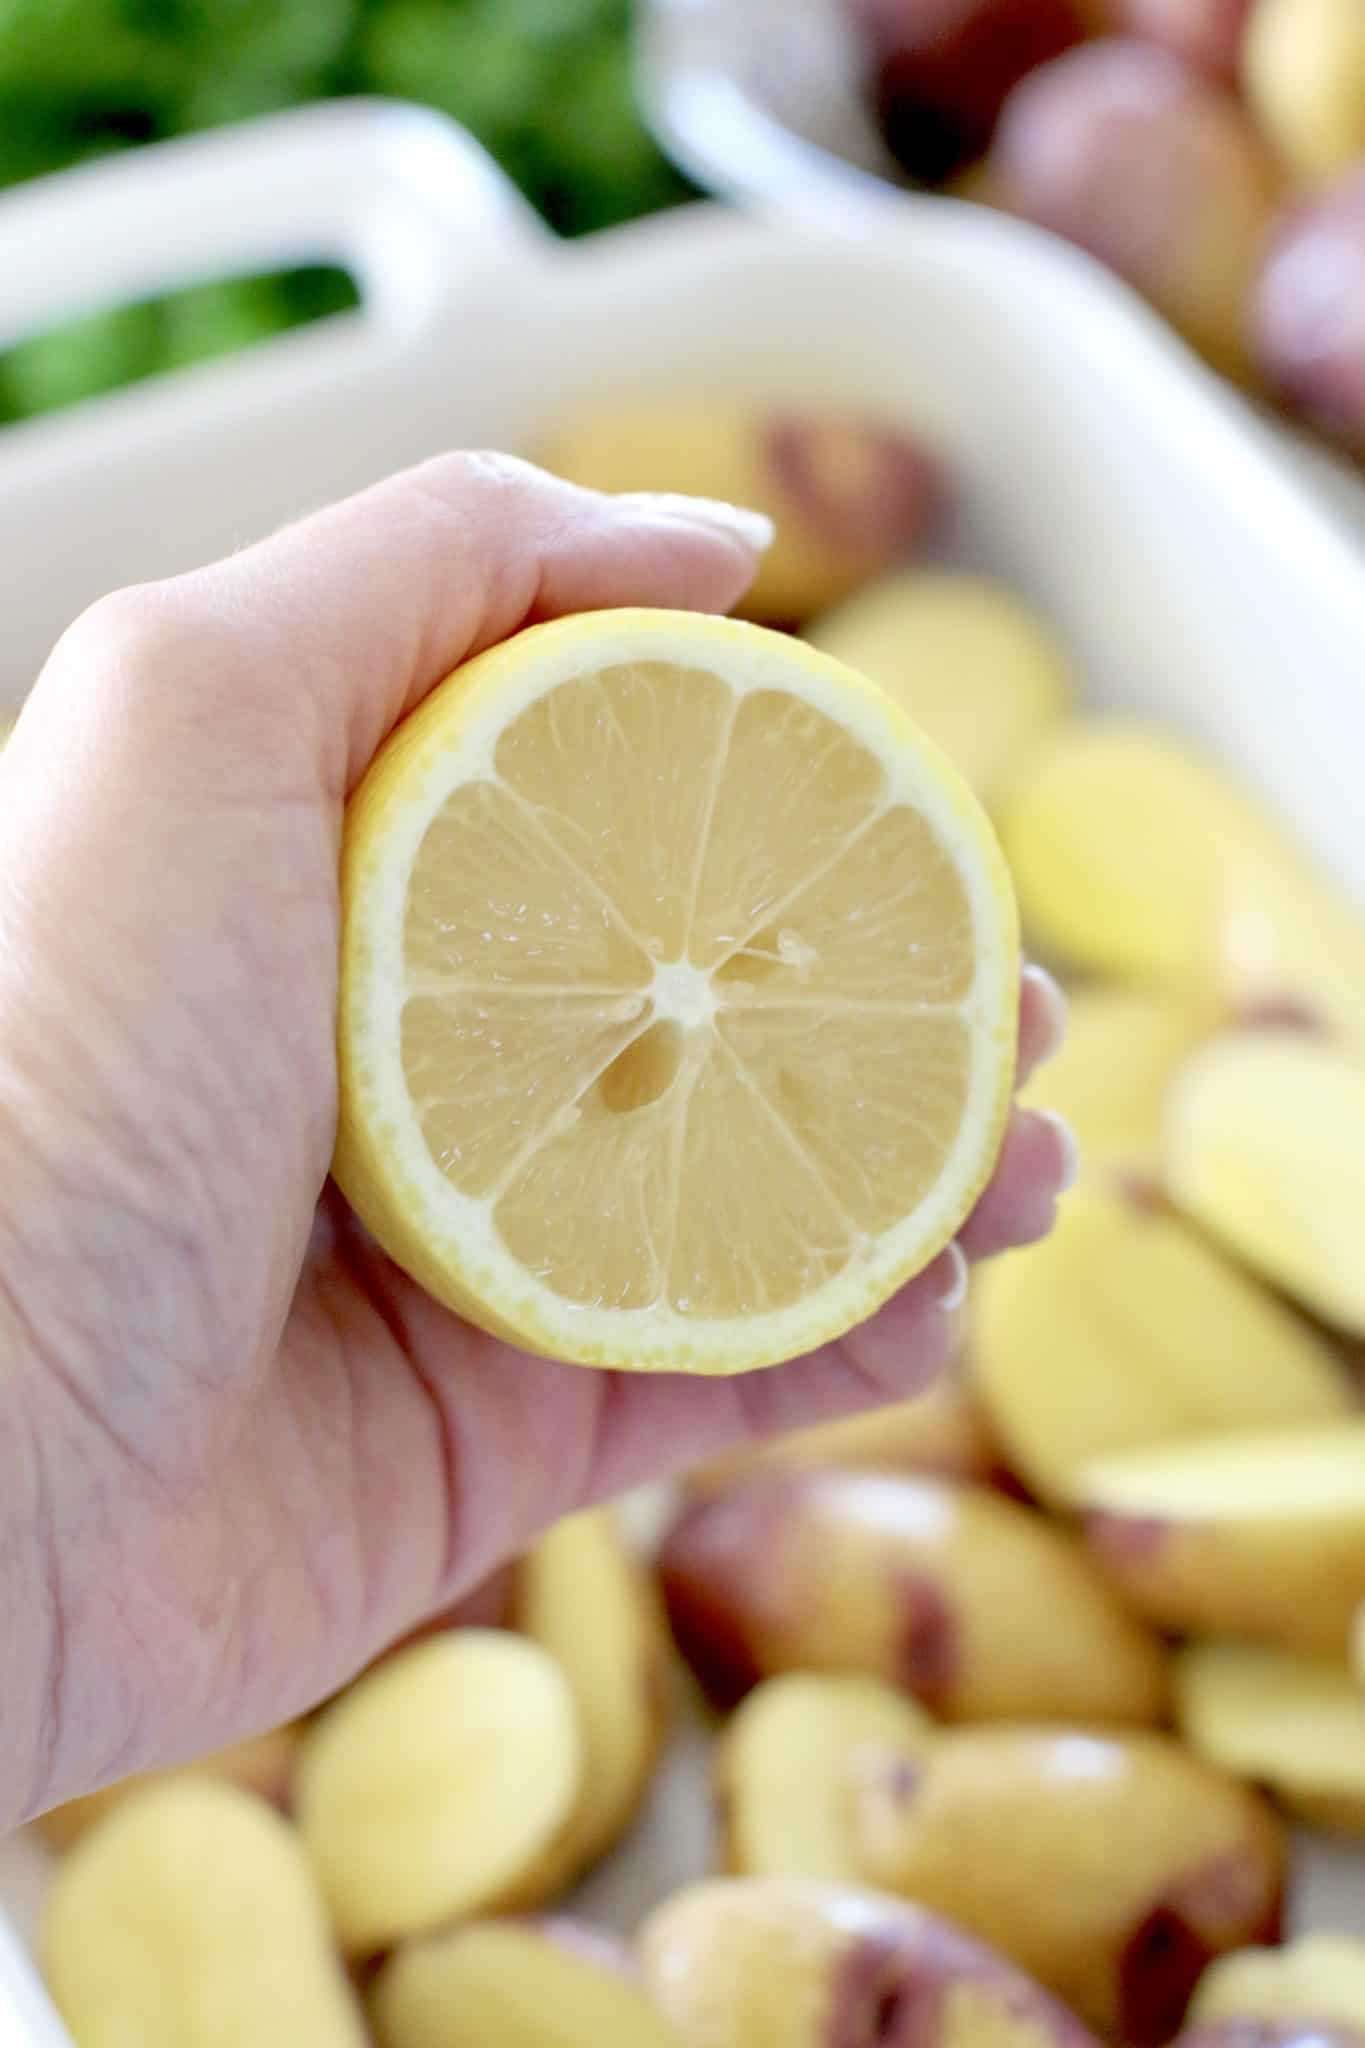 a hand squeezing lemon juice out of half a lemon over sliced potatoes in baking dish.